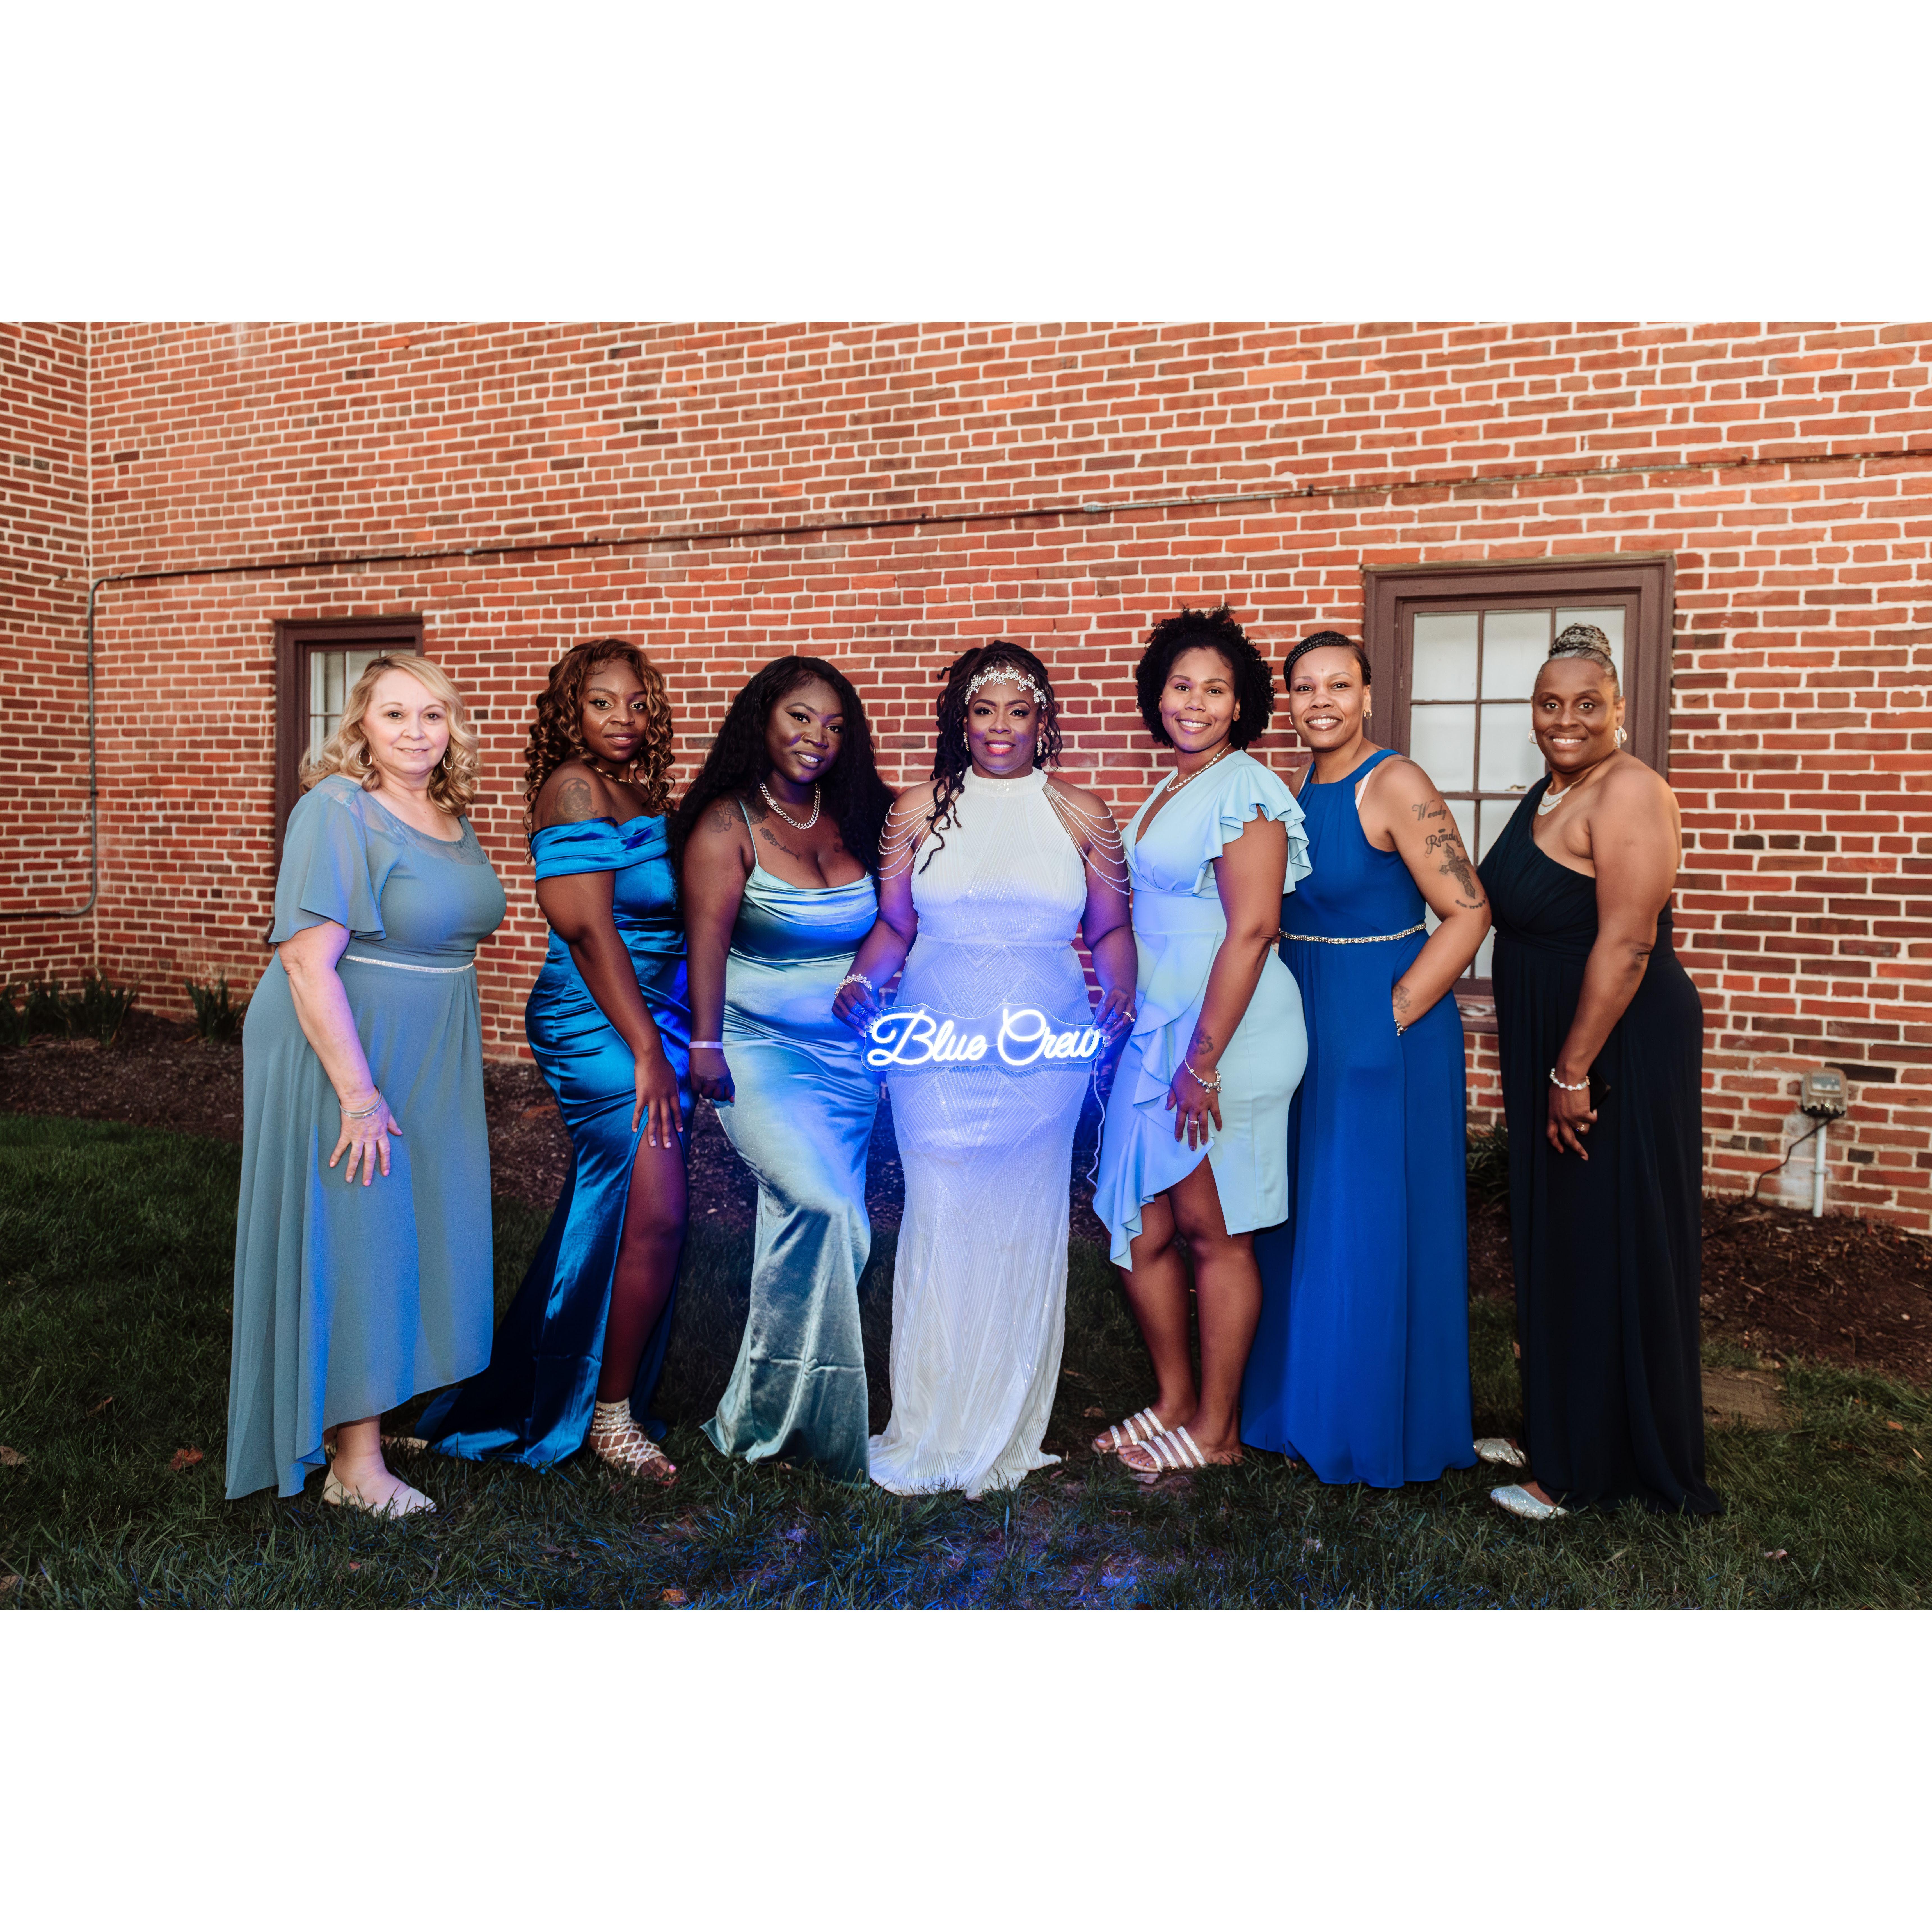 "Something Blue Crew" 
Lisa- Read the Irish Blessing
Charlotta - Bridal support
Sianneh - Did the Bride's makeup
Raven - Read Bible Verse
Wendy - Bridal support
Sanbanika - Did Brides hair
Thank You!